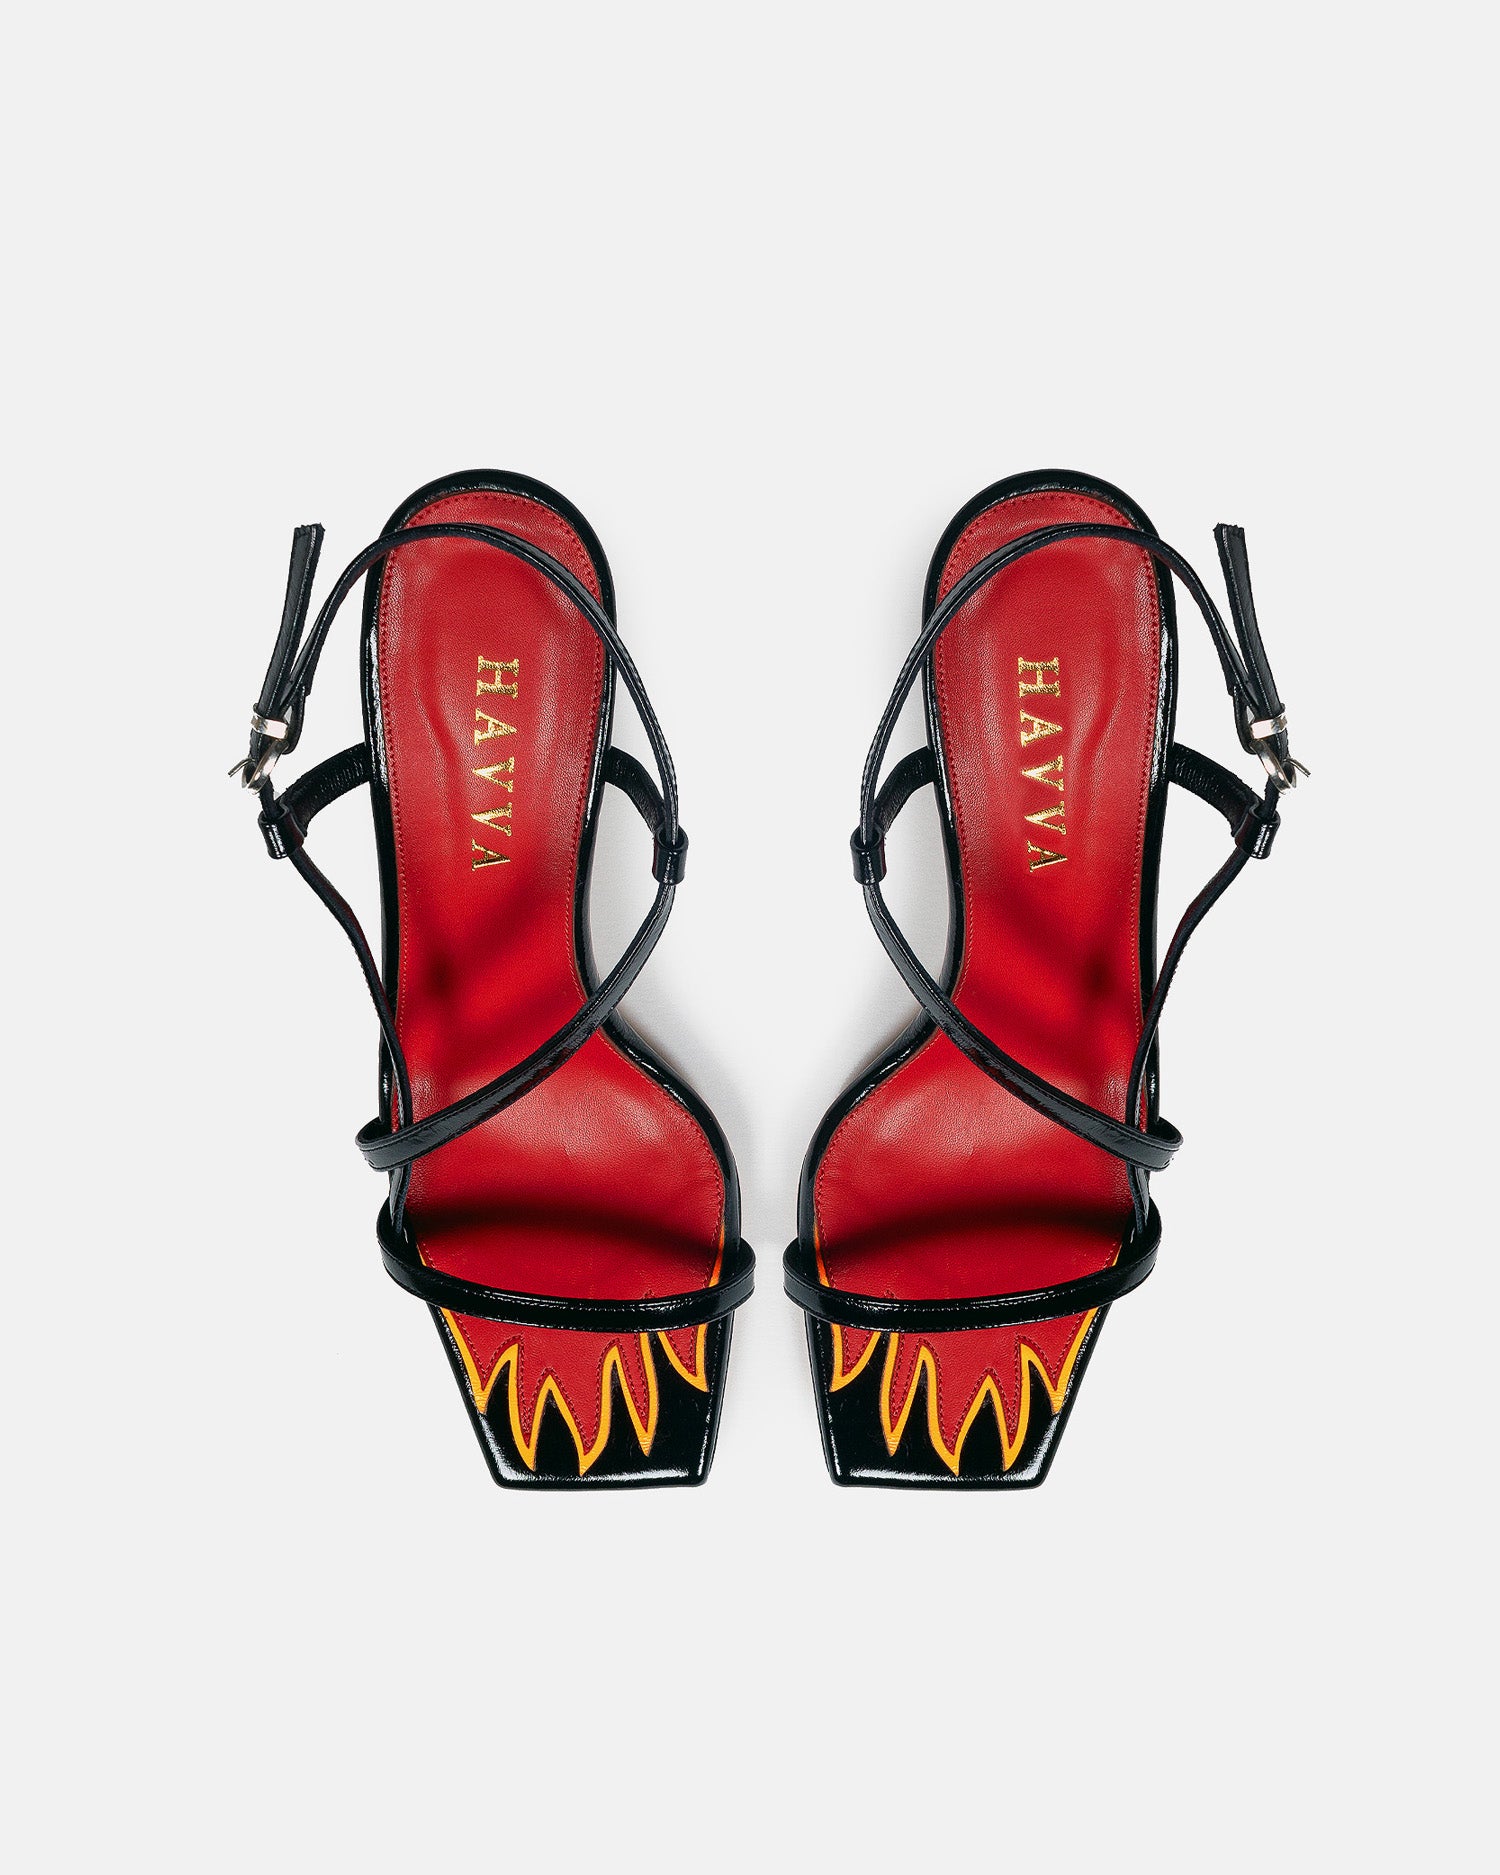 HAVVA black asymmetrical sandal with flame design within the insole